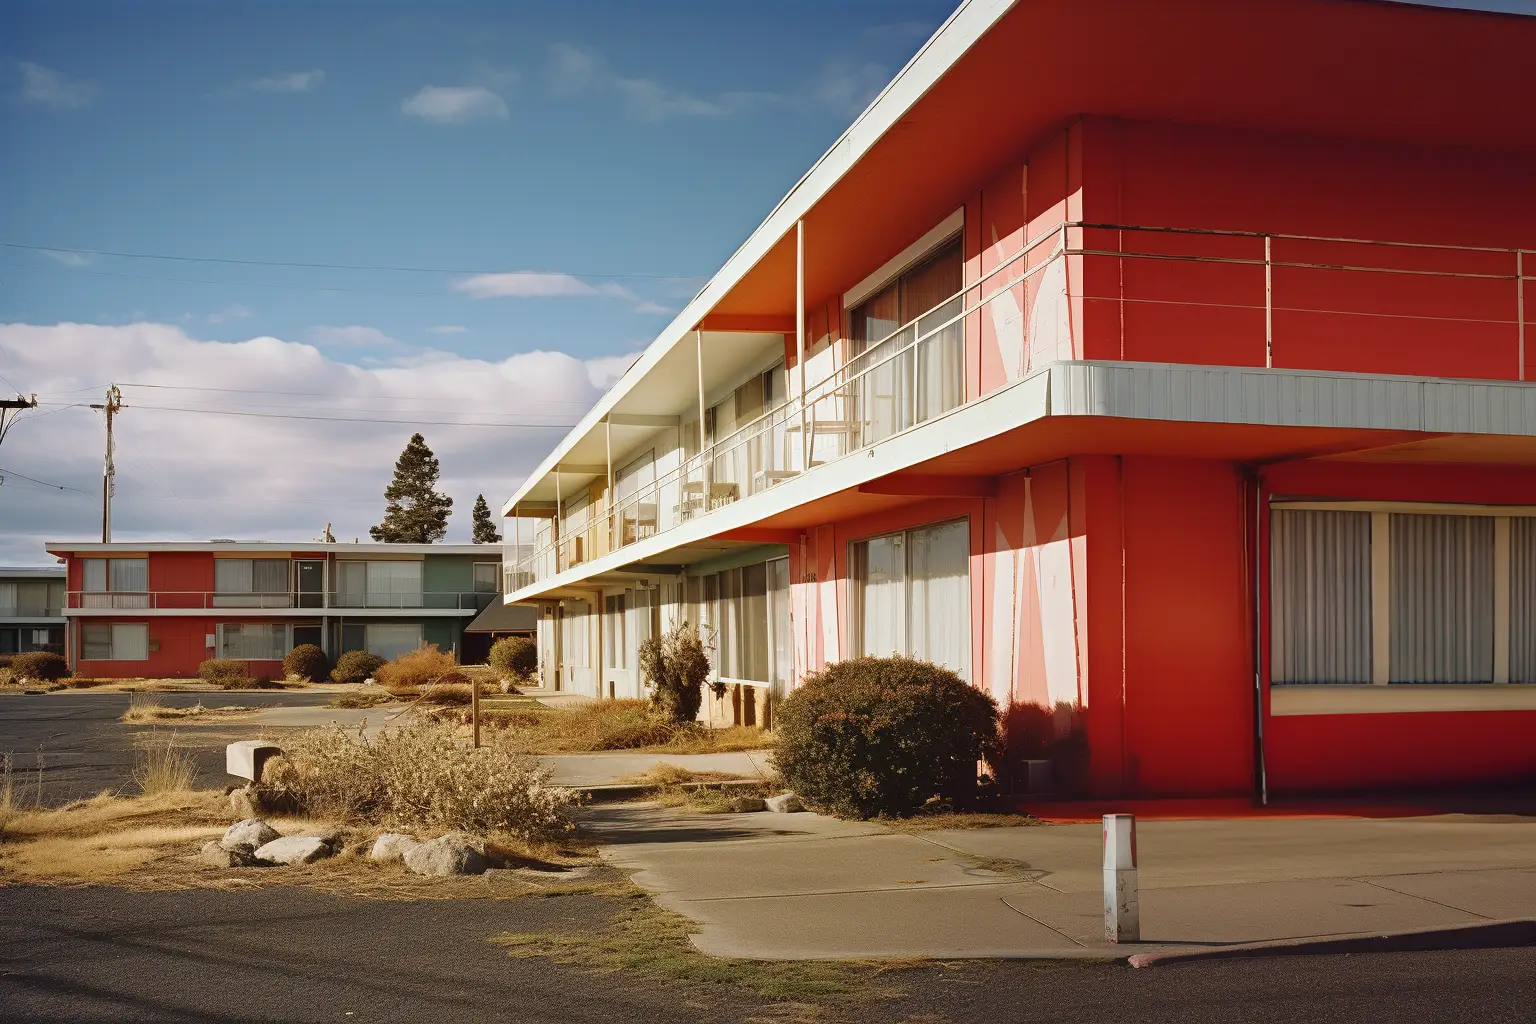 a photograph of a two-story motel, mostly red, clearly seen better days.